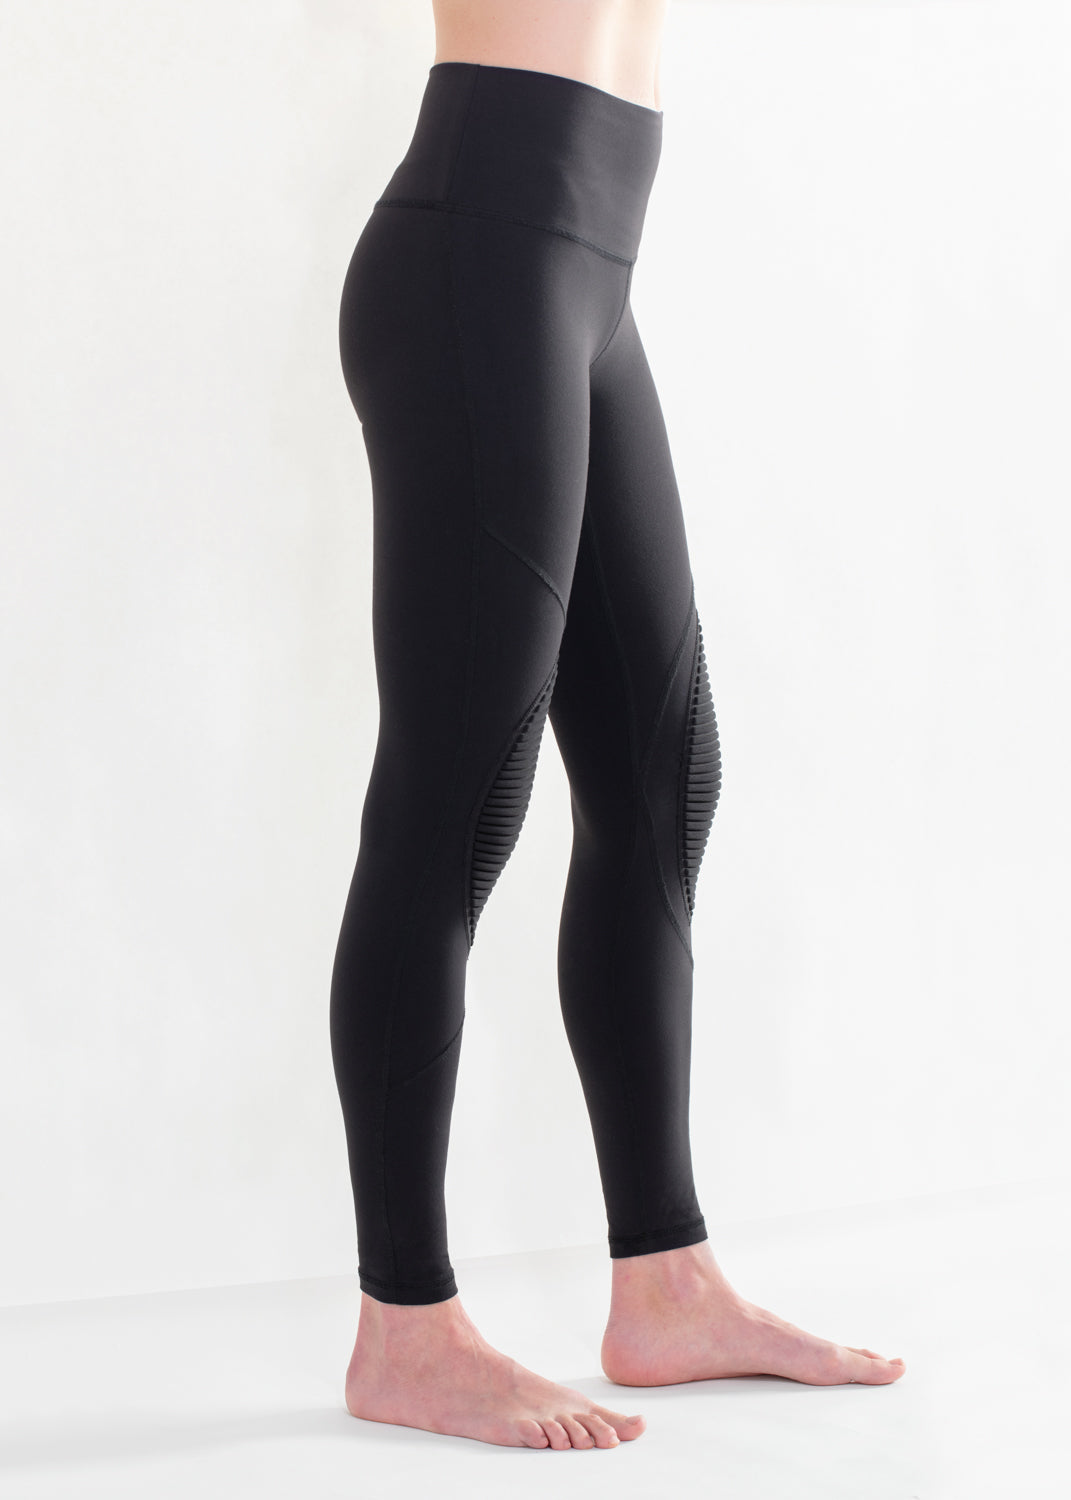 MAÄT performance legging with built in knee pads.